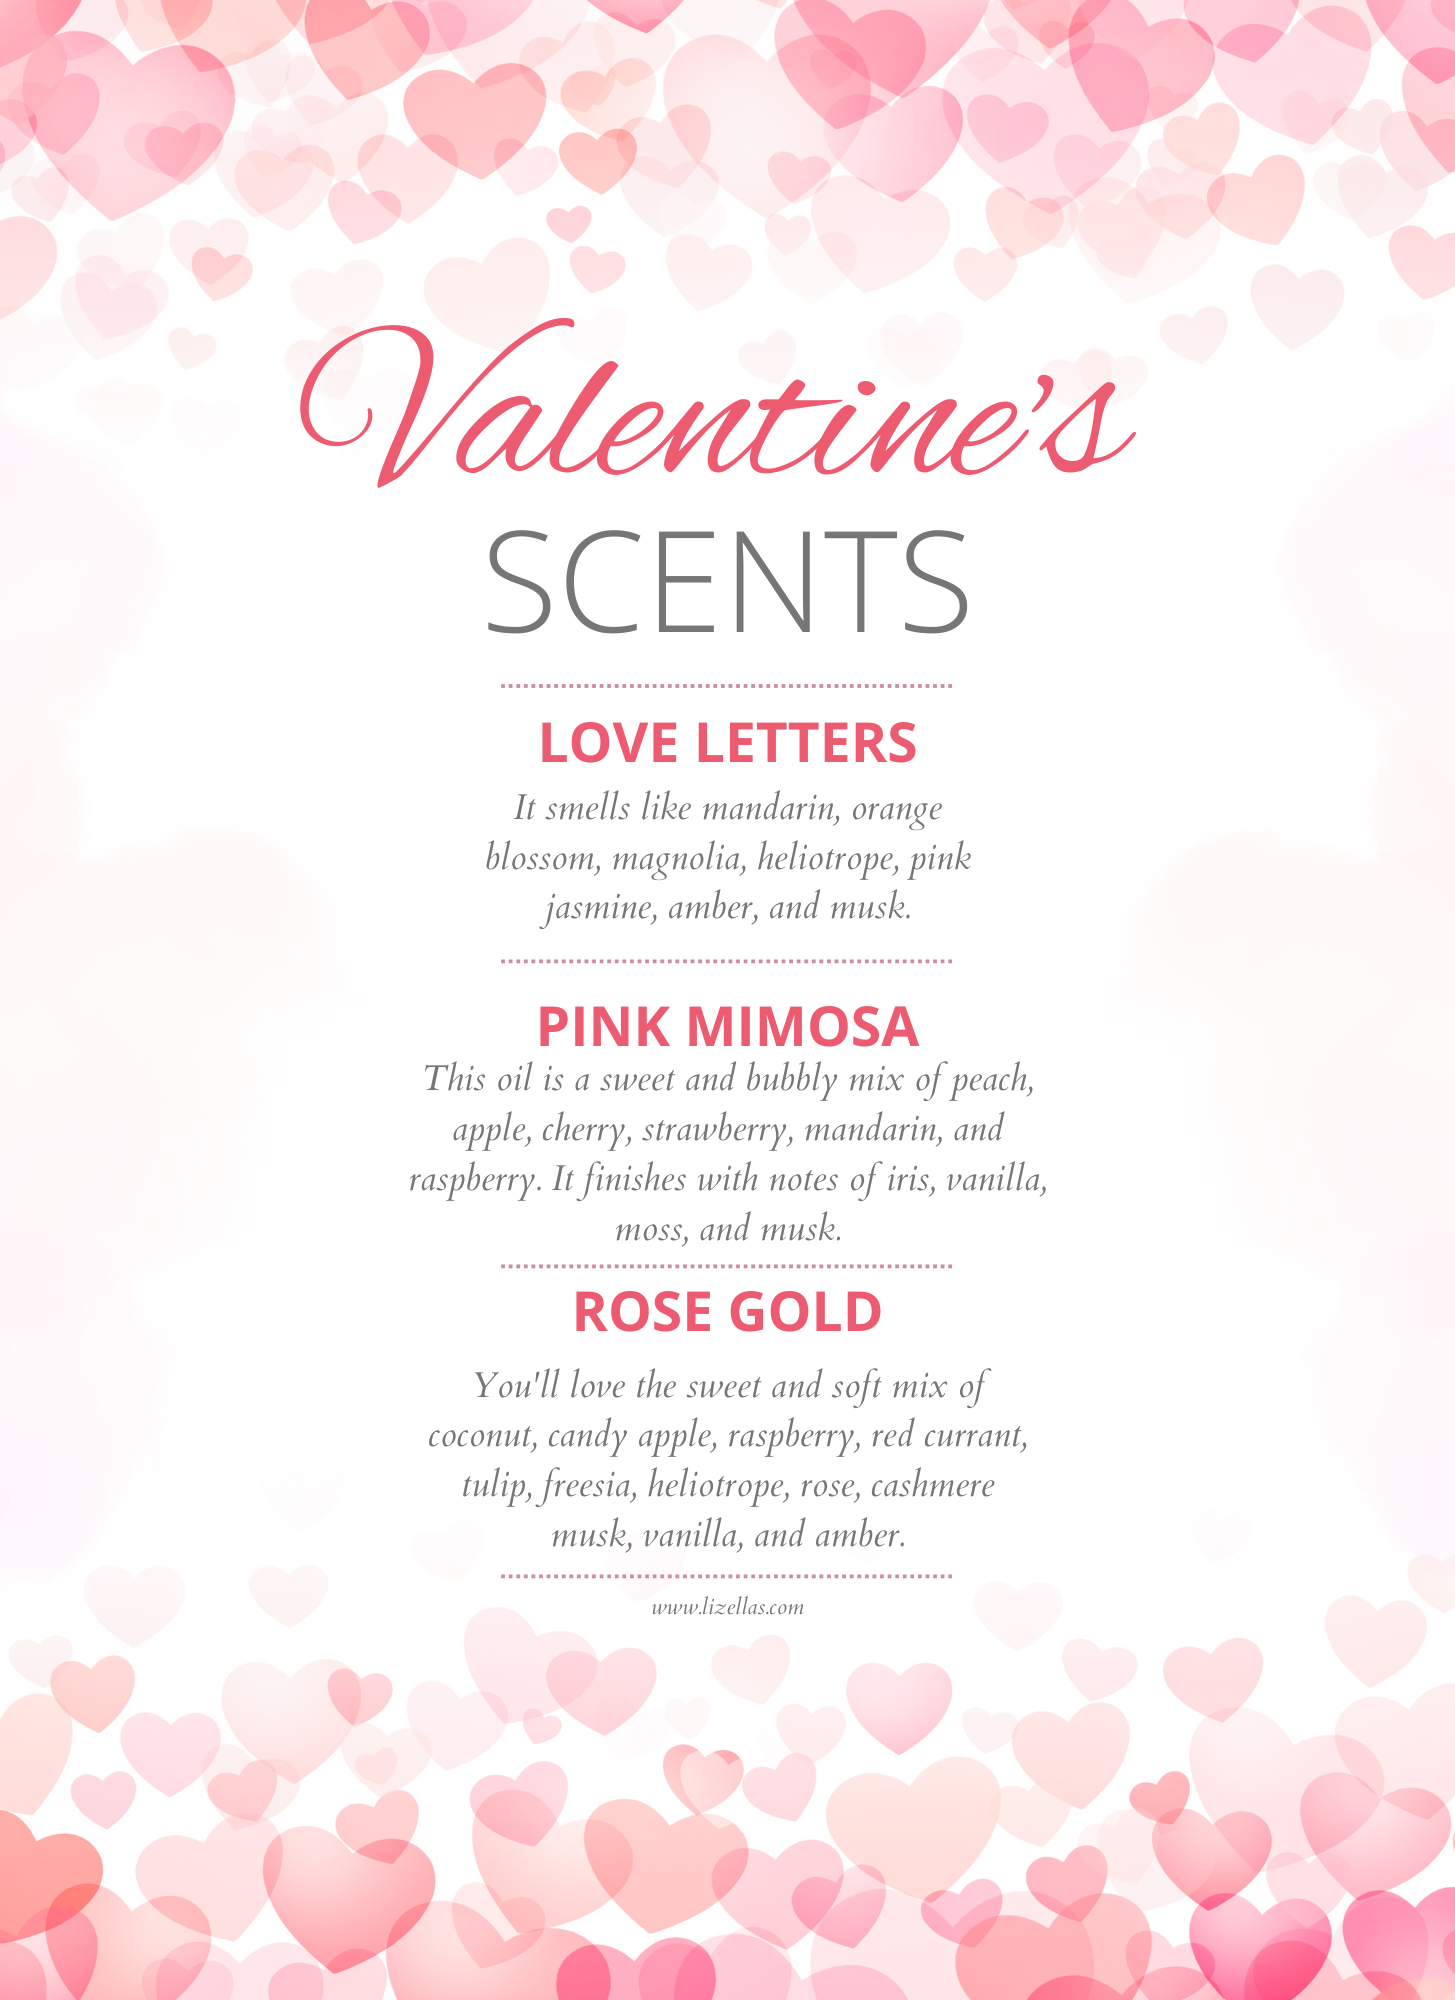 Learn About Our Valentine's Day Scents